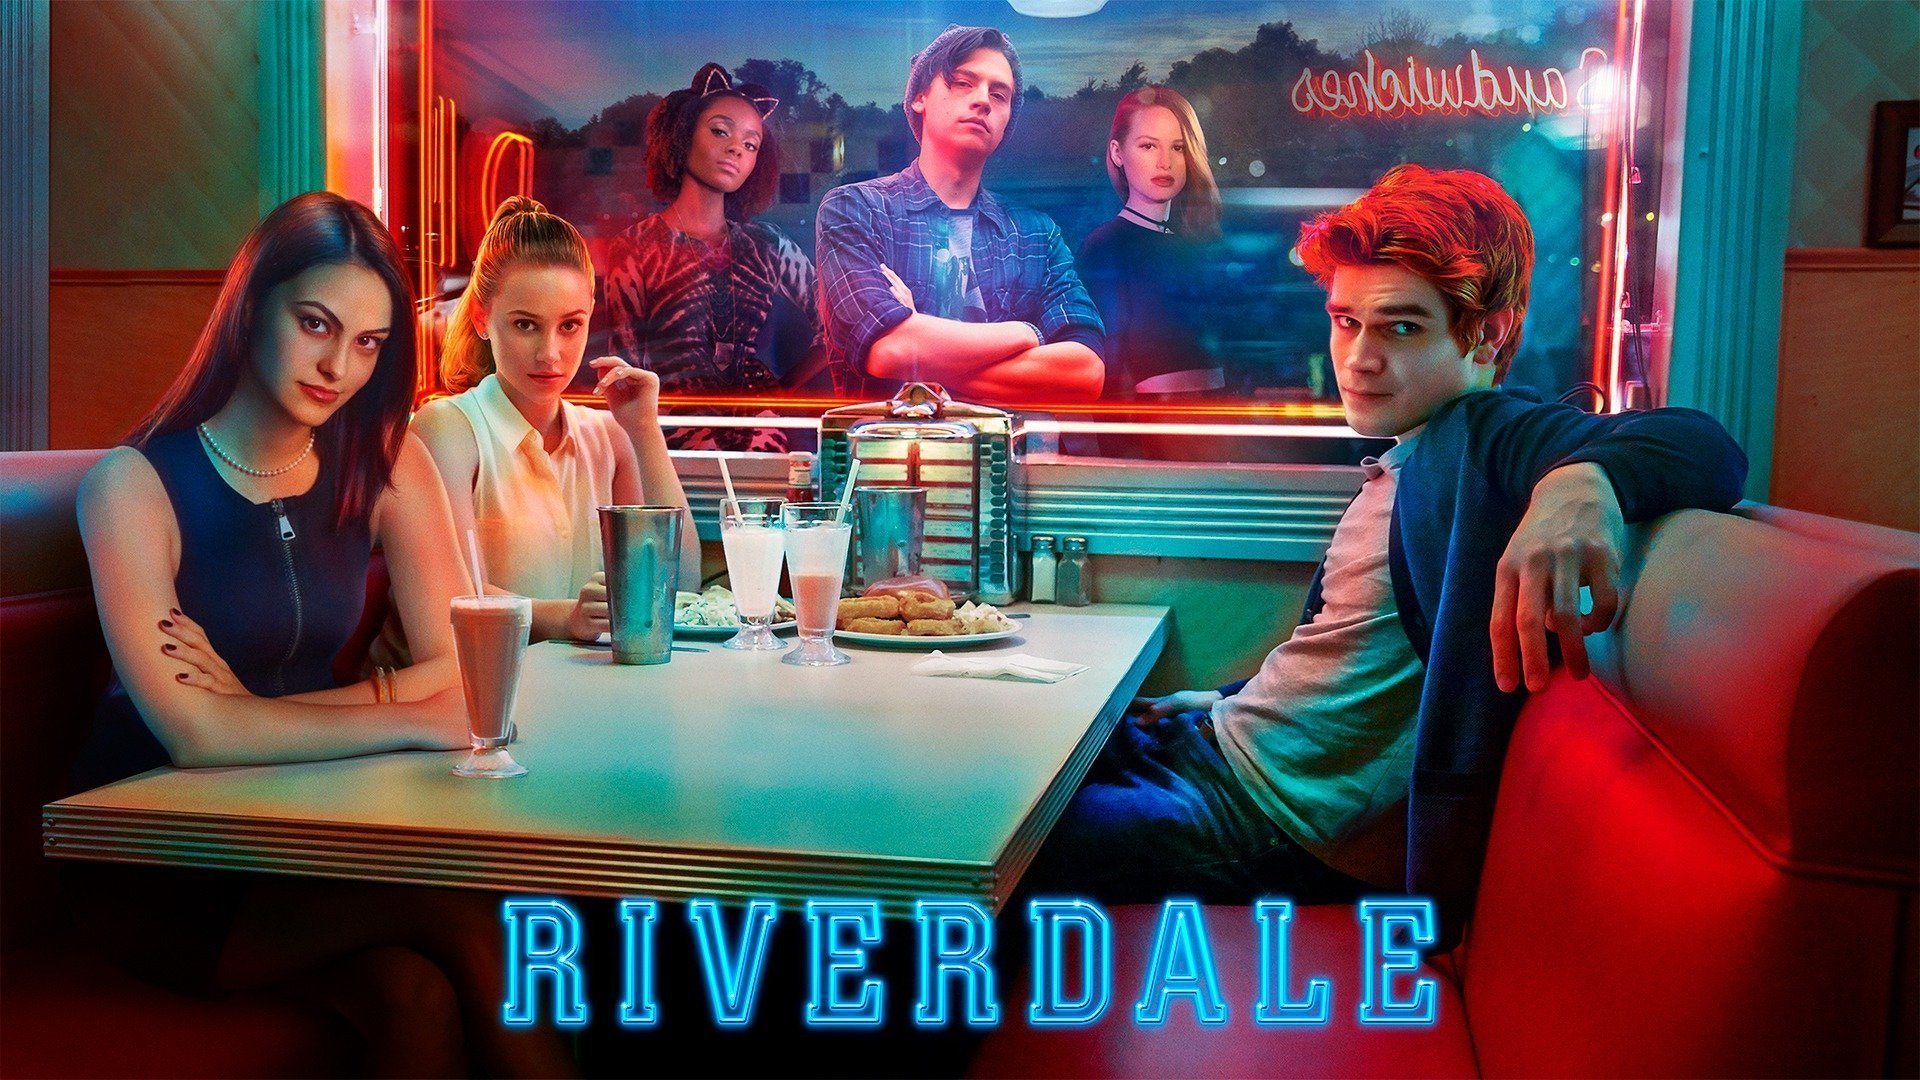 Camila Mendes, Lili Reinhart Madelaine And Petsch From Riverdale Show Wallpapers